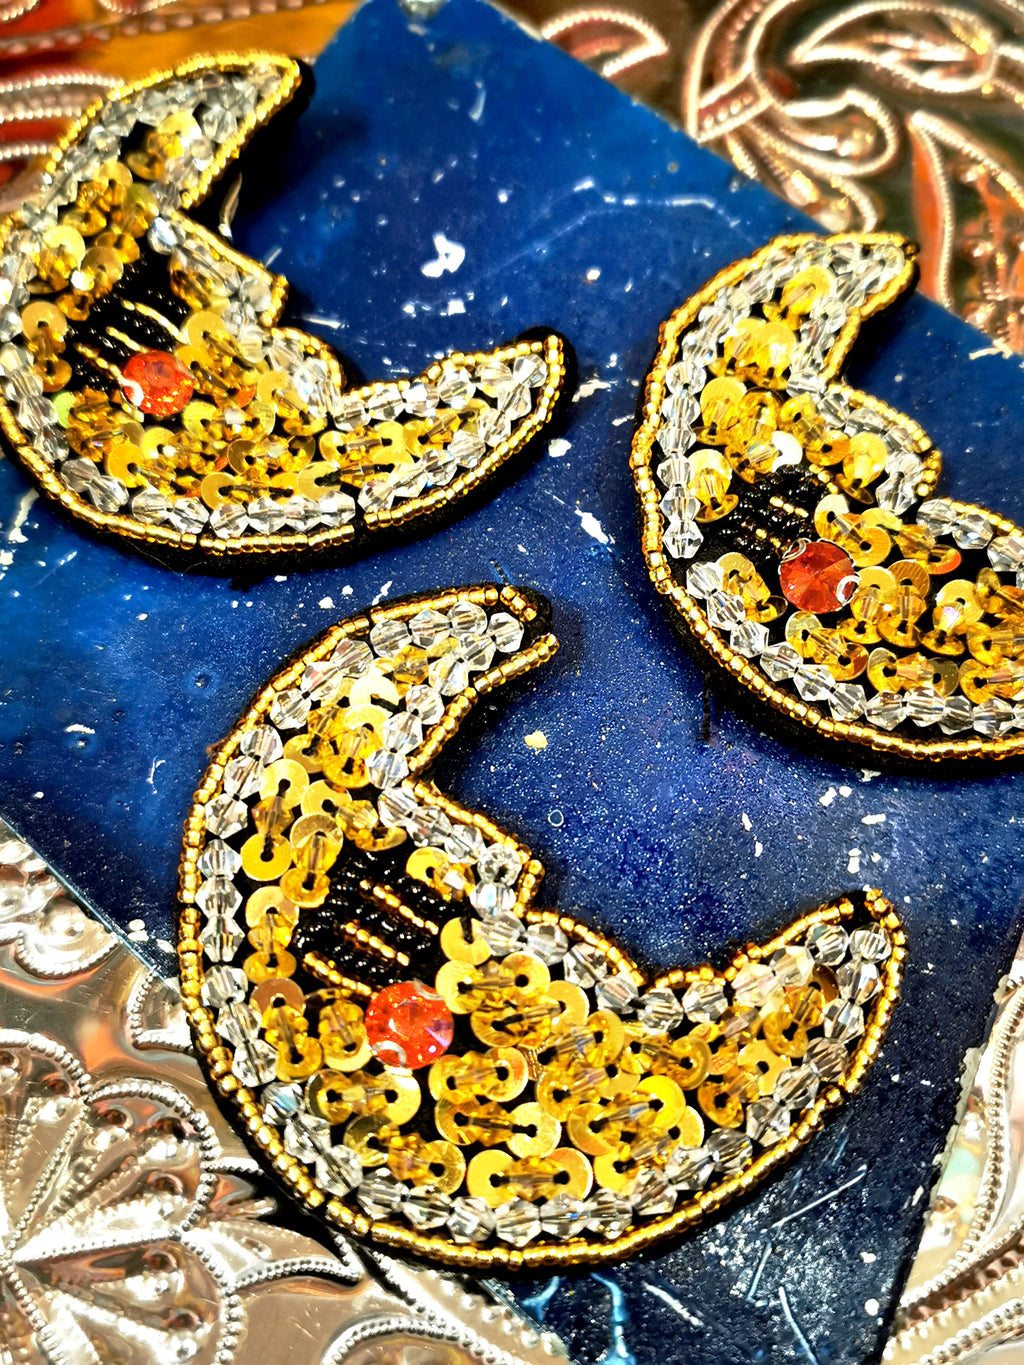 Sleeping celestial beauty of a crescent moon brooch, hand sewn felt adorned with beads, crystals and sequins.

7cm x 6cm



